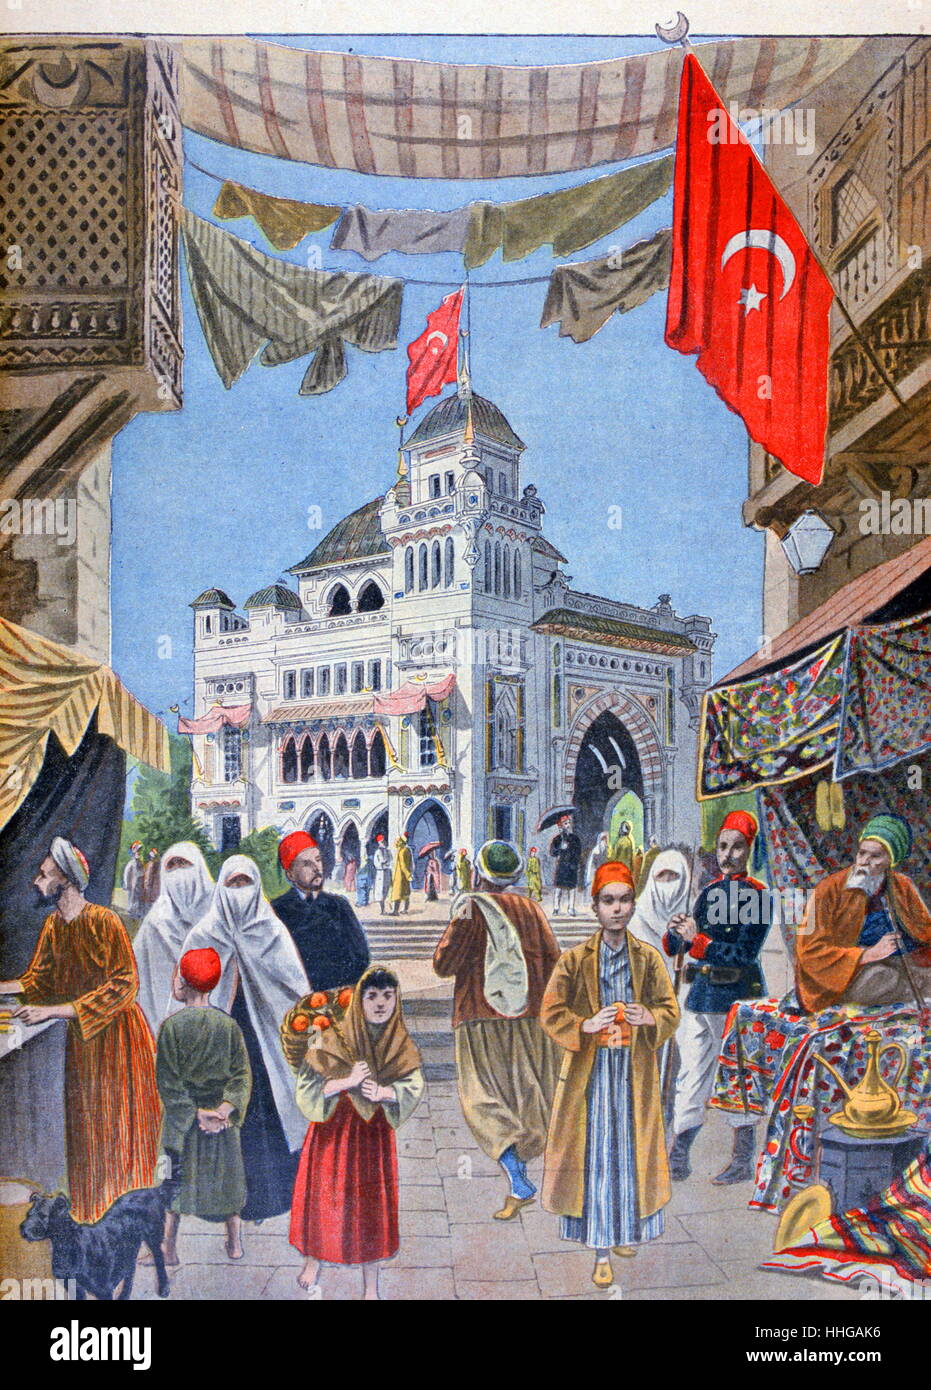 Illustration showing the Turkish (Ottoman Empire) Pavilion, at the Exposition Universelle of 1900. This was a fair held in Paris, France, from 14 April to 12 November 1900, to celebrate the achievements of the past century and to accelerate development into the next. Stock Photo